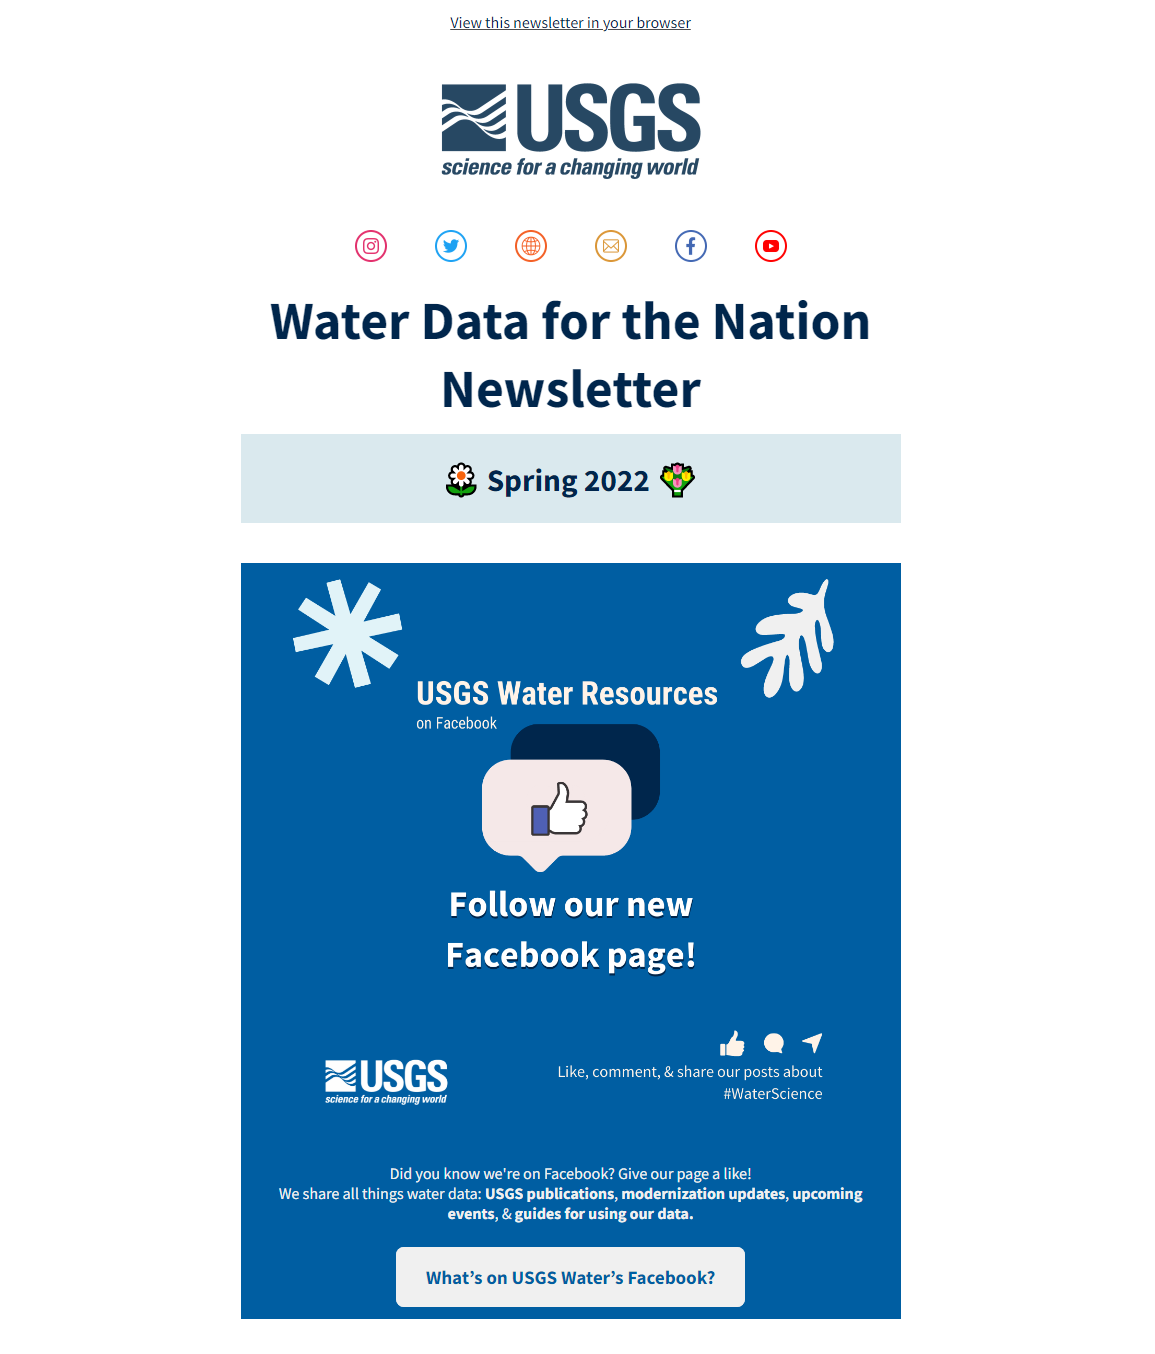 Blue USGS logo is at the top. Water Data for the Nation Newsletter. Spring 2022. USGS Water Resources on Facebook. Follow our new Facebook page! Like, comment, & share our posts about #WaterScience. Did you know we're on Facebook? Give our page a like! We share all things water data: USGS publications, modernization updates, upcoming events, & guides for using our data. What's on USGS Water's Facebook?